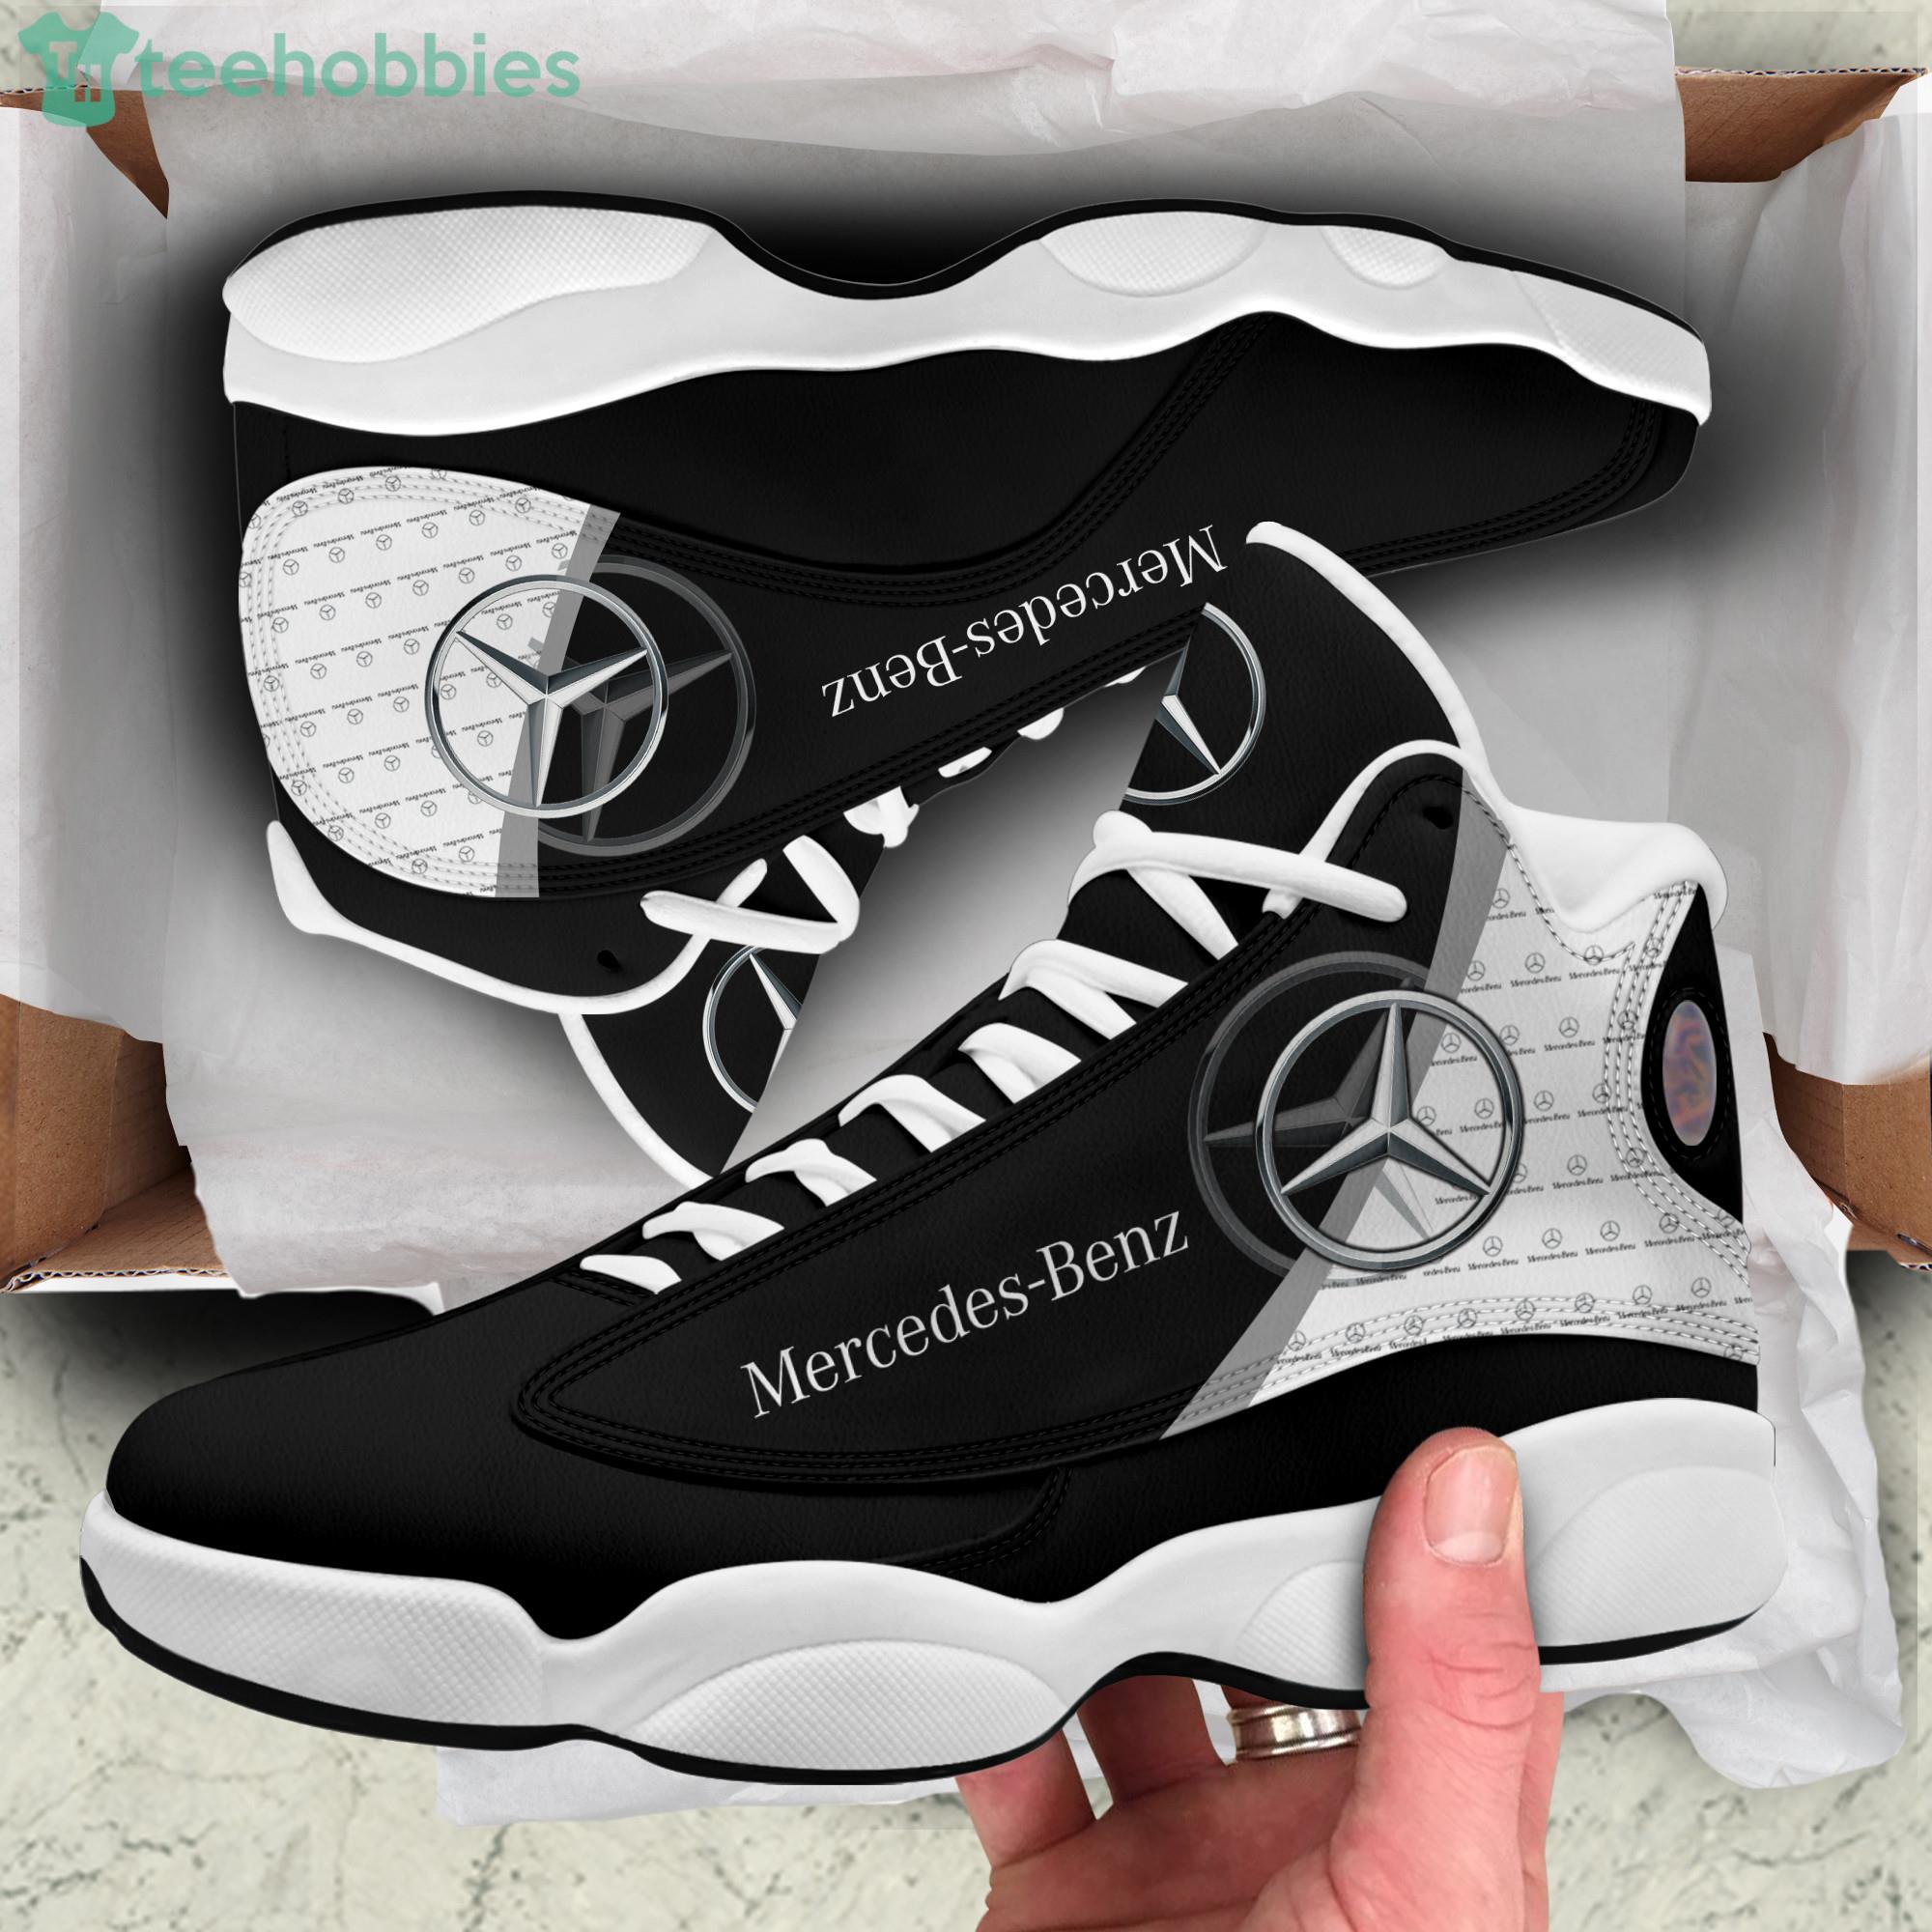 3D All Over Printed Mercedes-Benz Air Jordan 13 Shoes Product Photo 2 Product photo 2